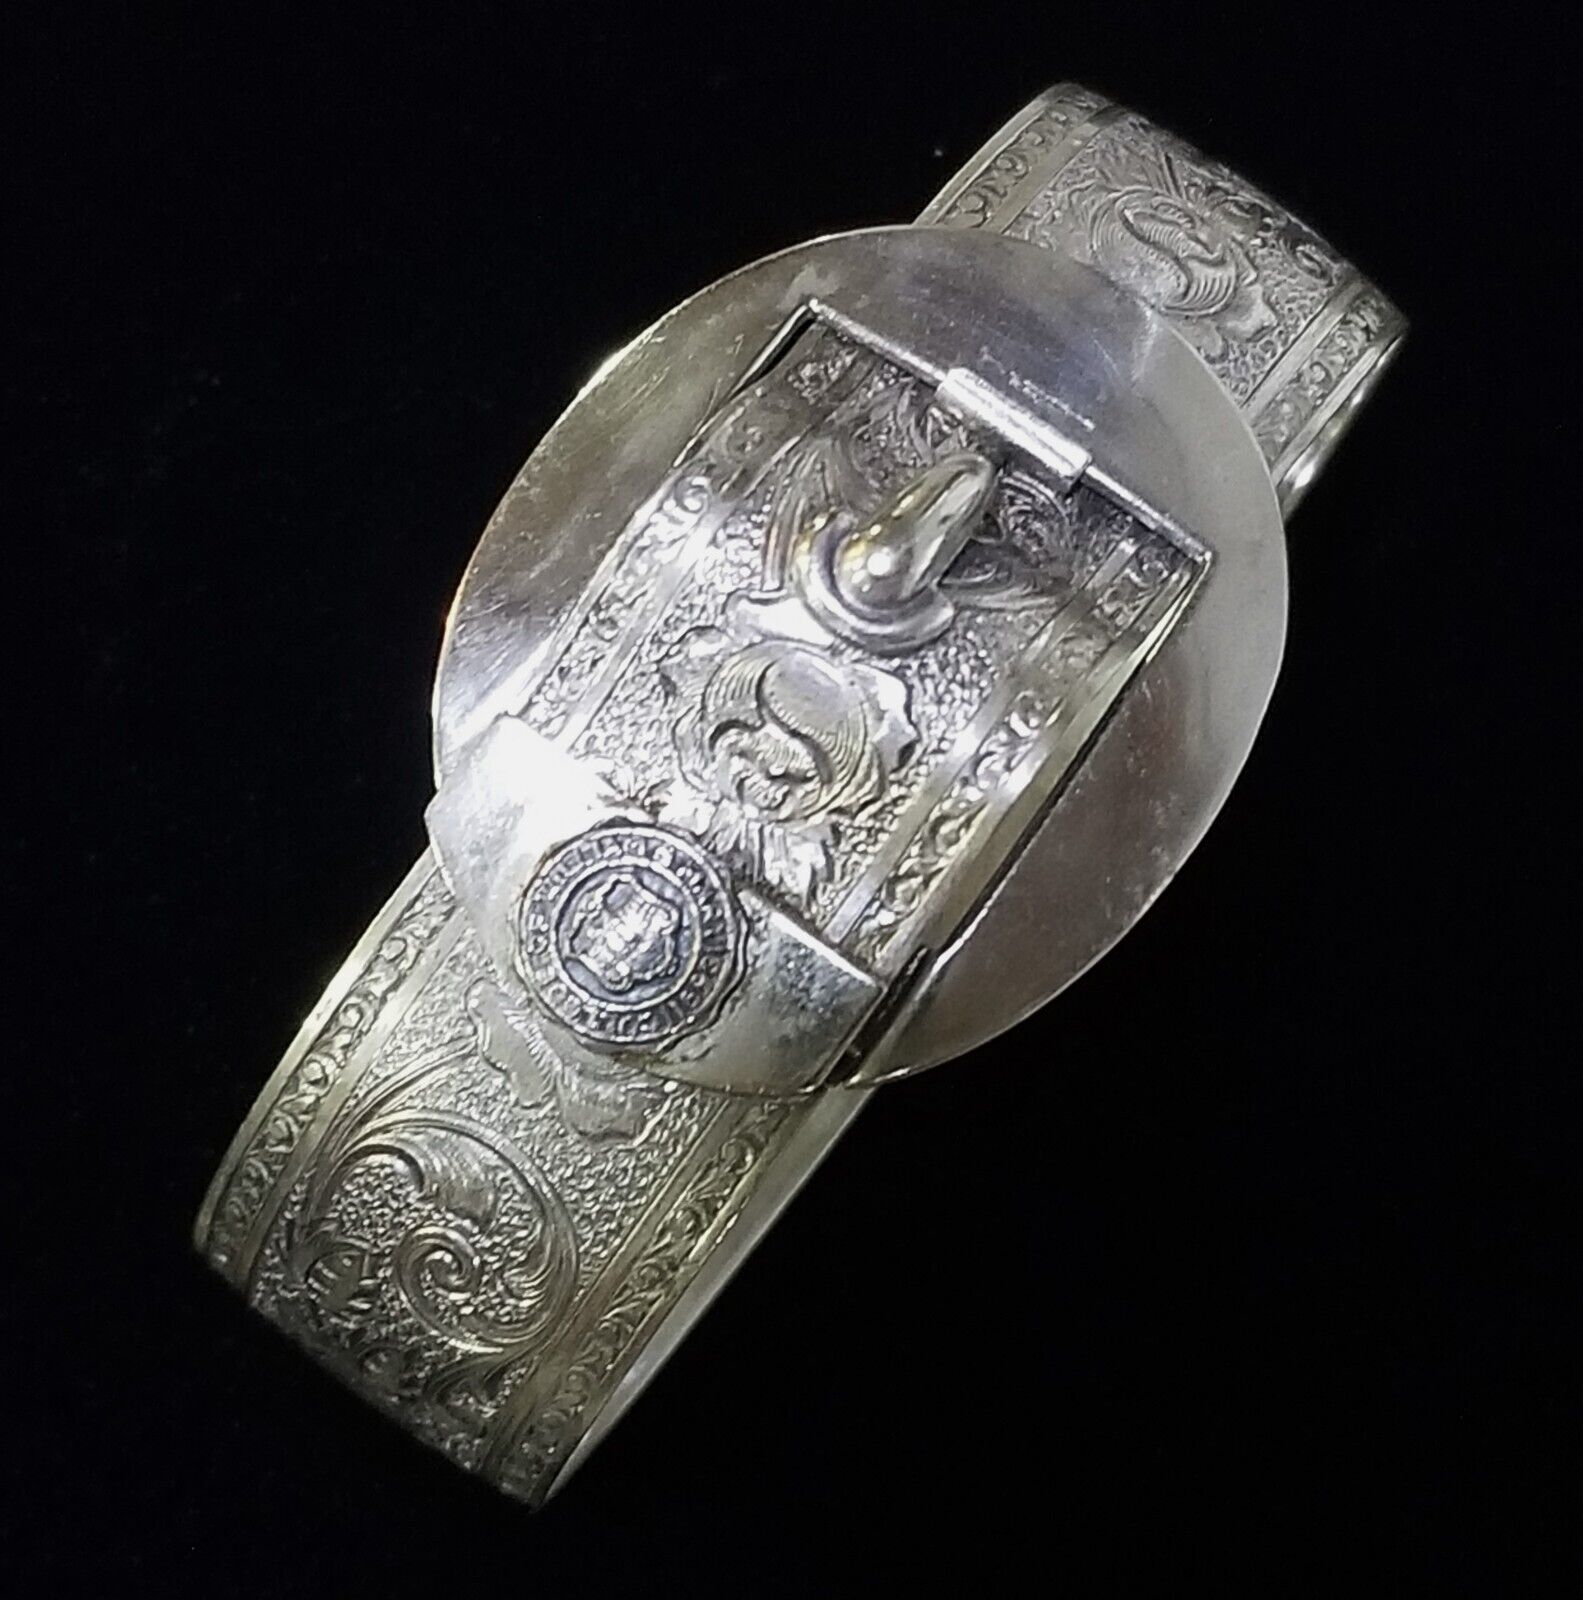 RARE Antique Silver Buckle Bracelet COLLEGE of WILLIAM & MARY Seal 1693